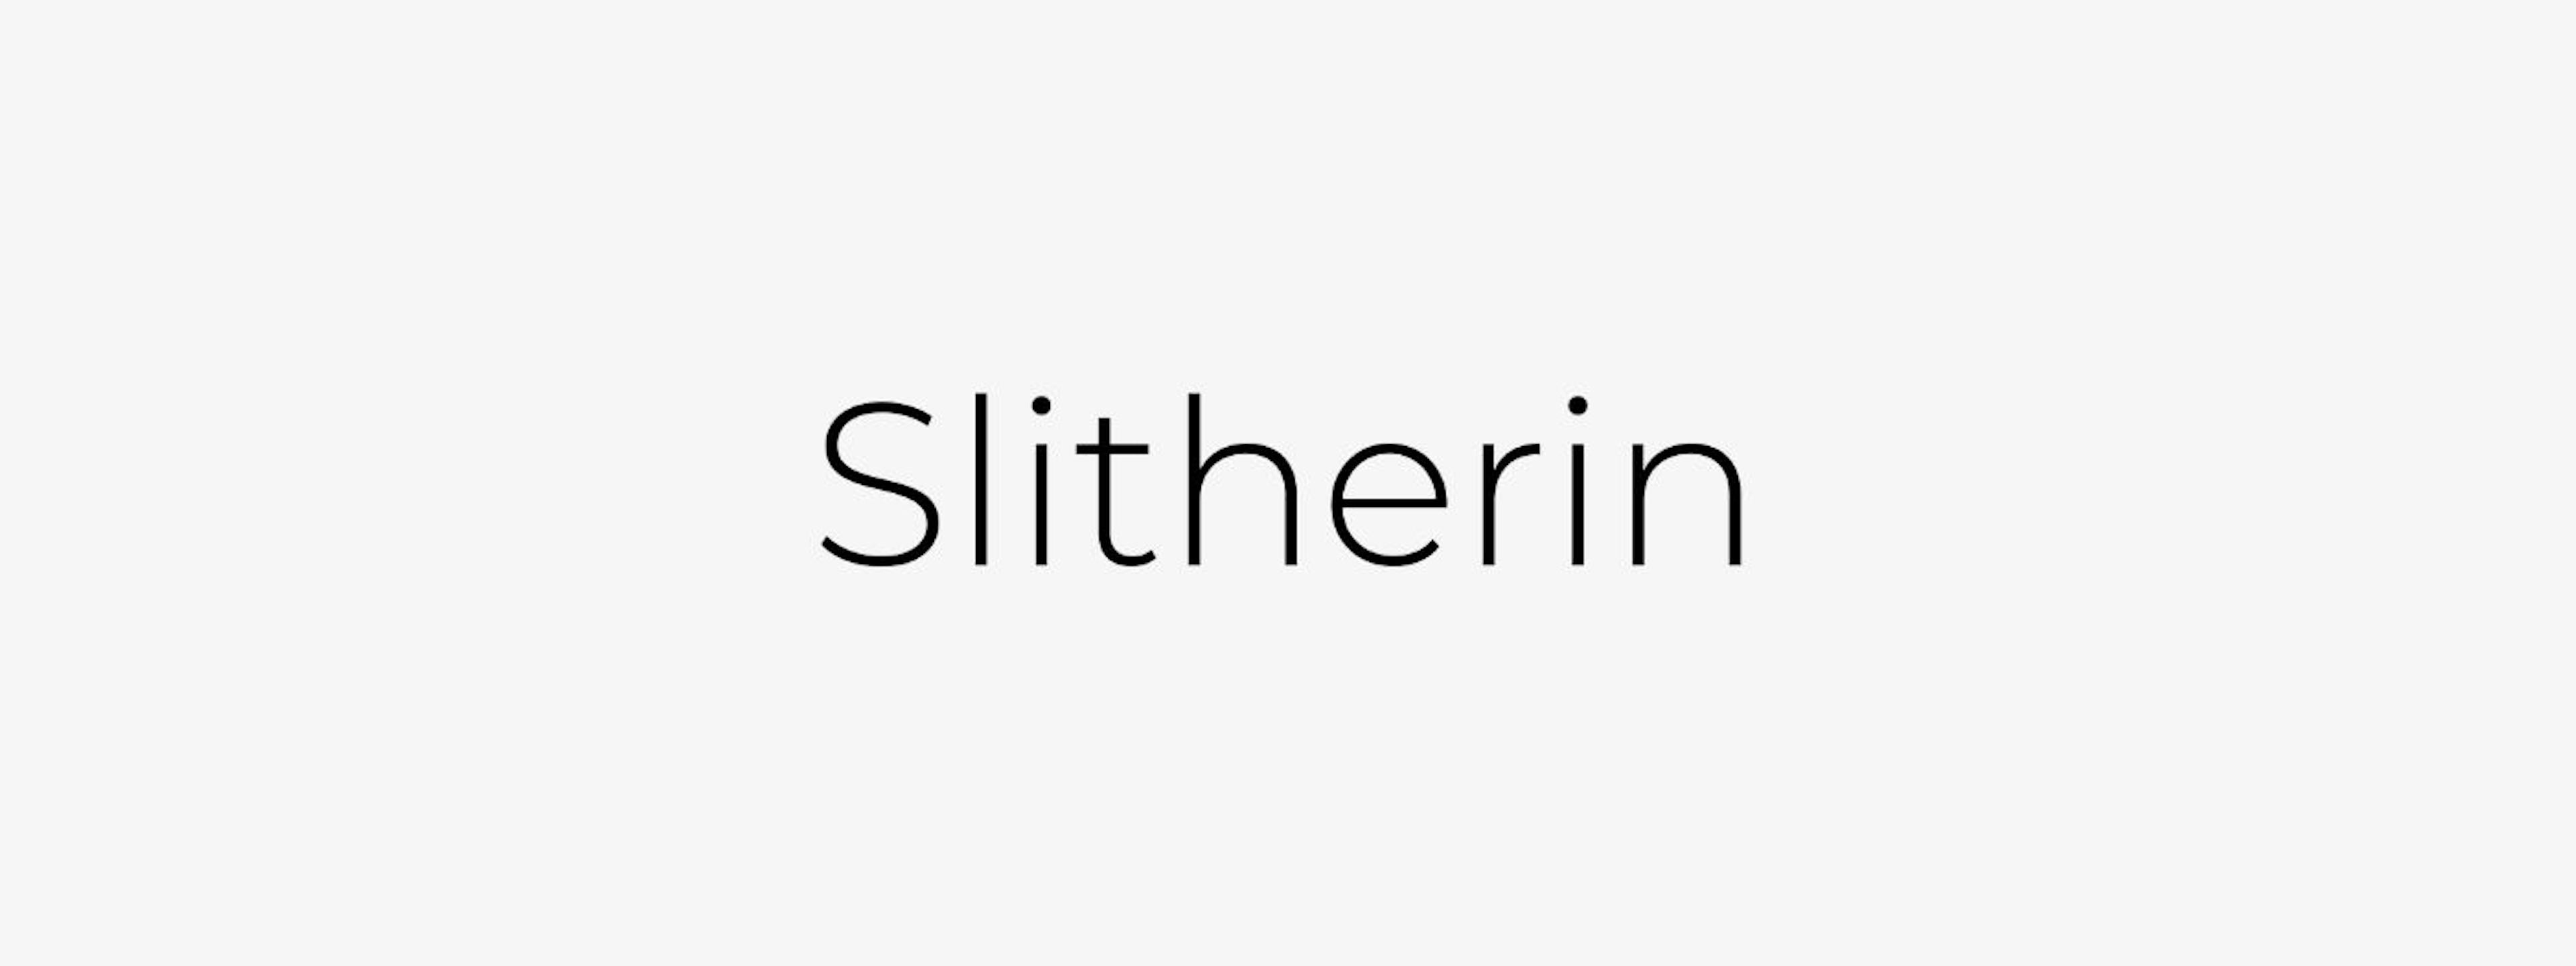 featured image - Slitherin: Our Very Own Slither detectors